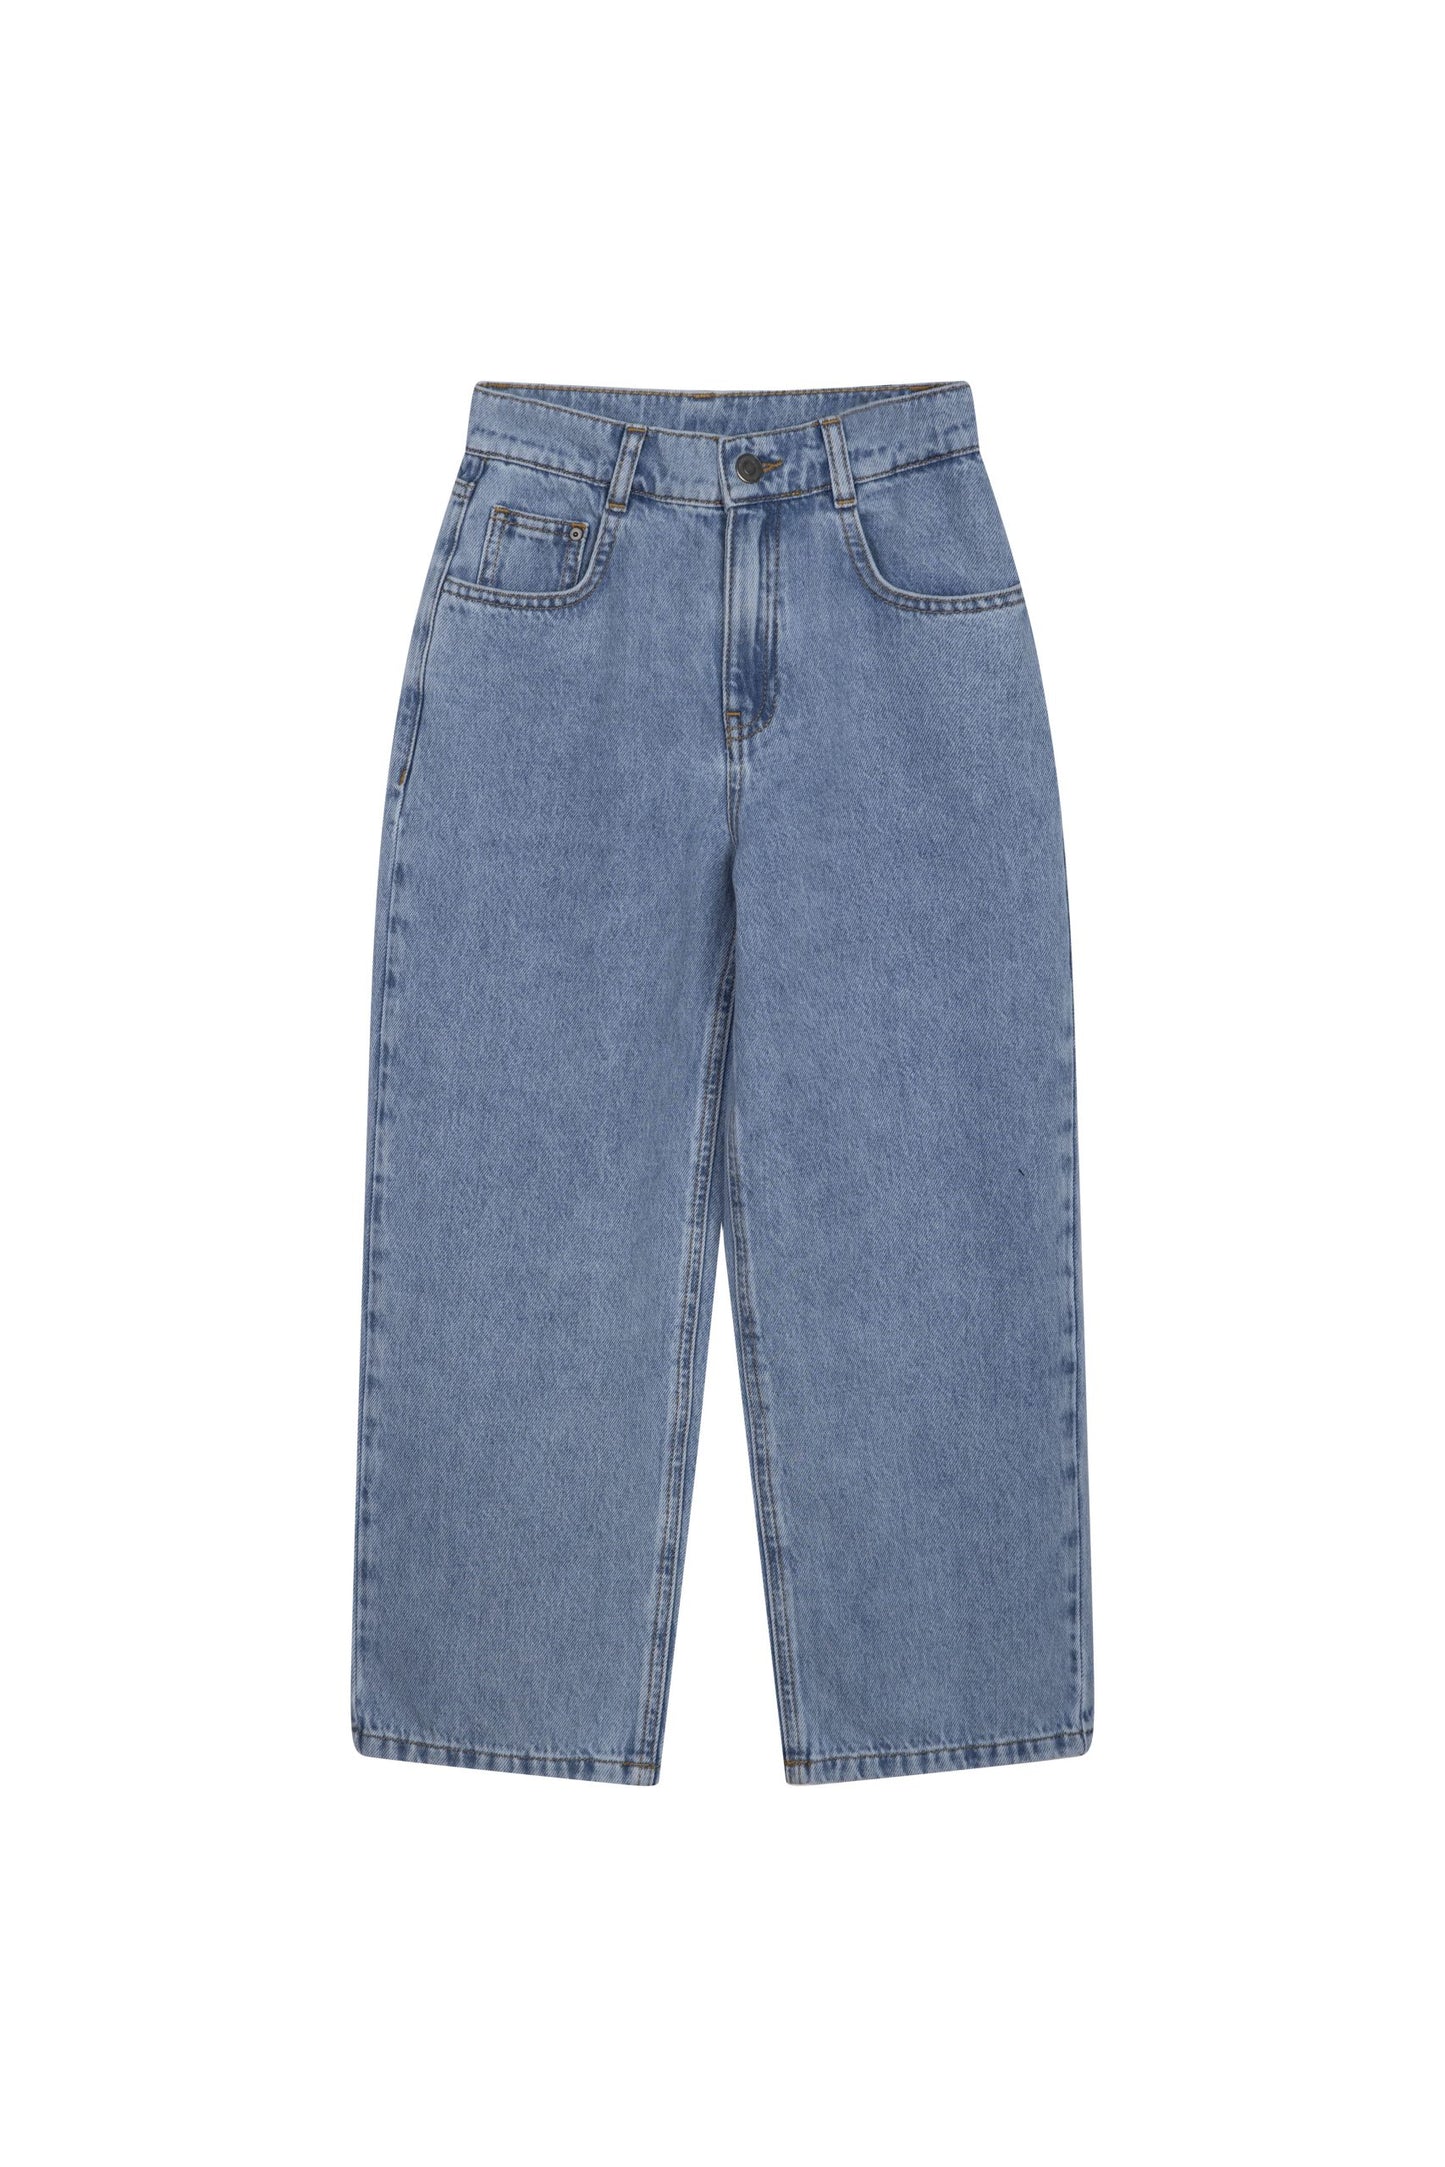 Sandro cropped jeans organic